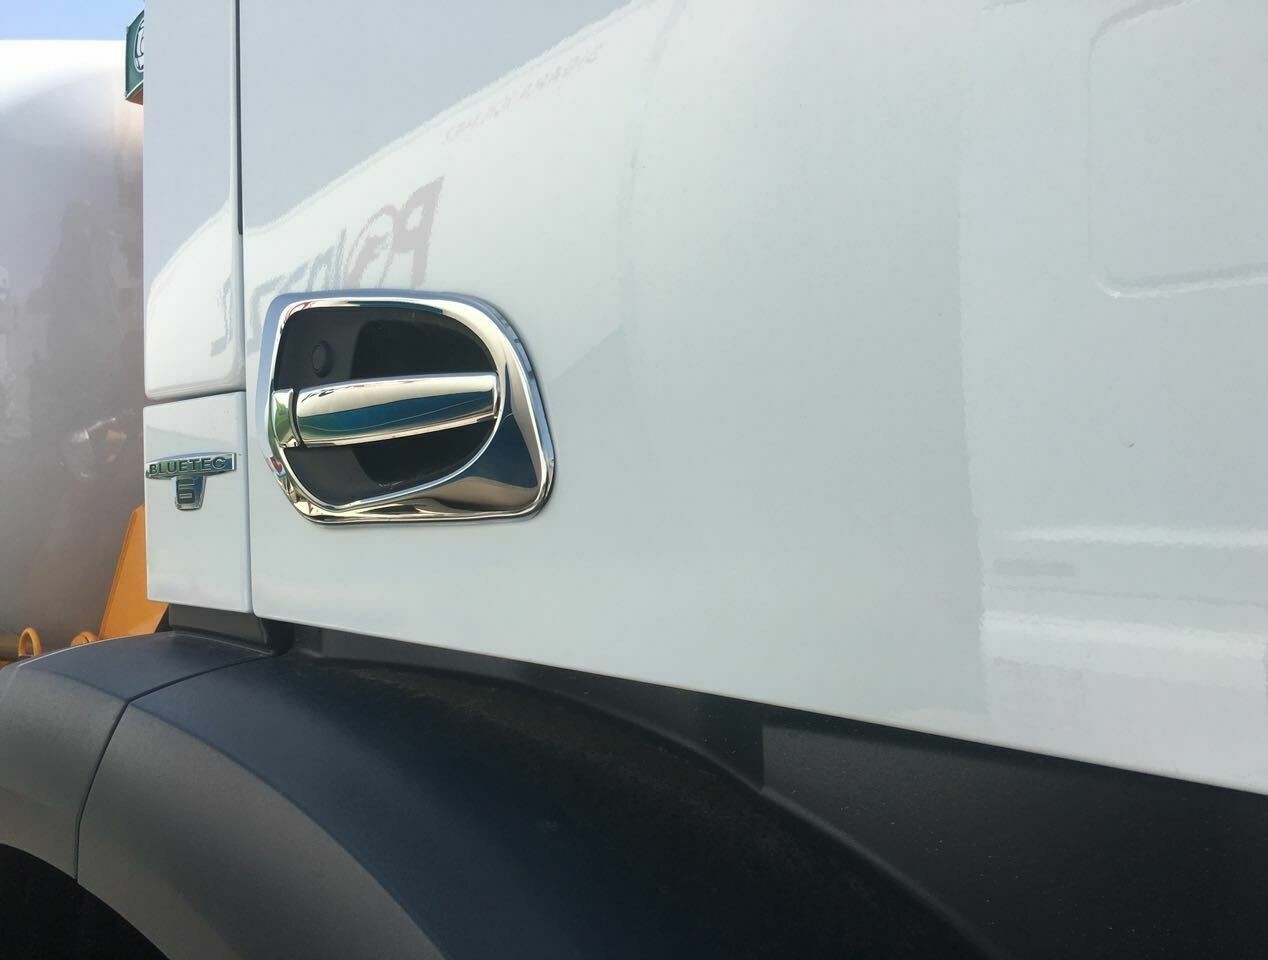 Mercedes Actros MP4 Chrome Door Handle Cover 4 Pcs 2013 Onwards Stainless Steel